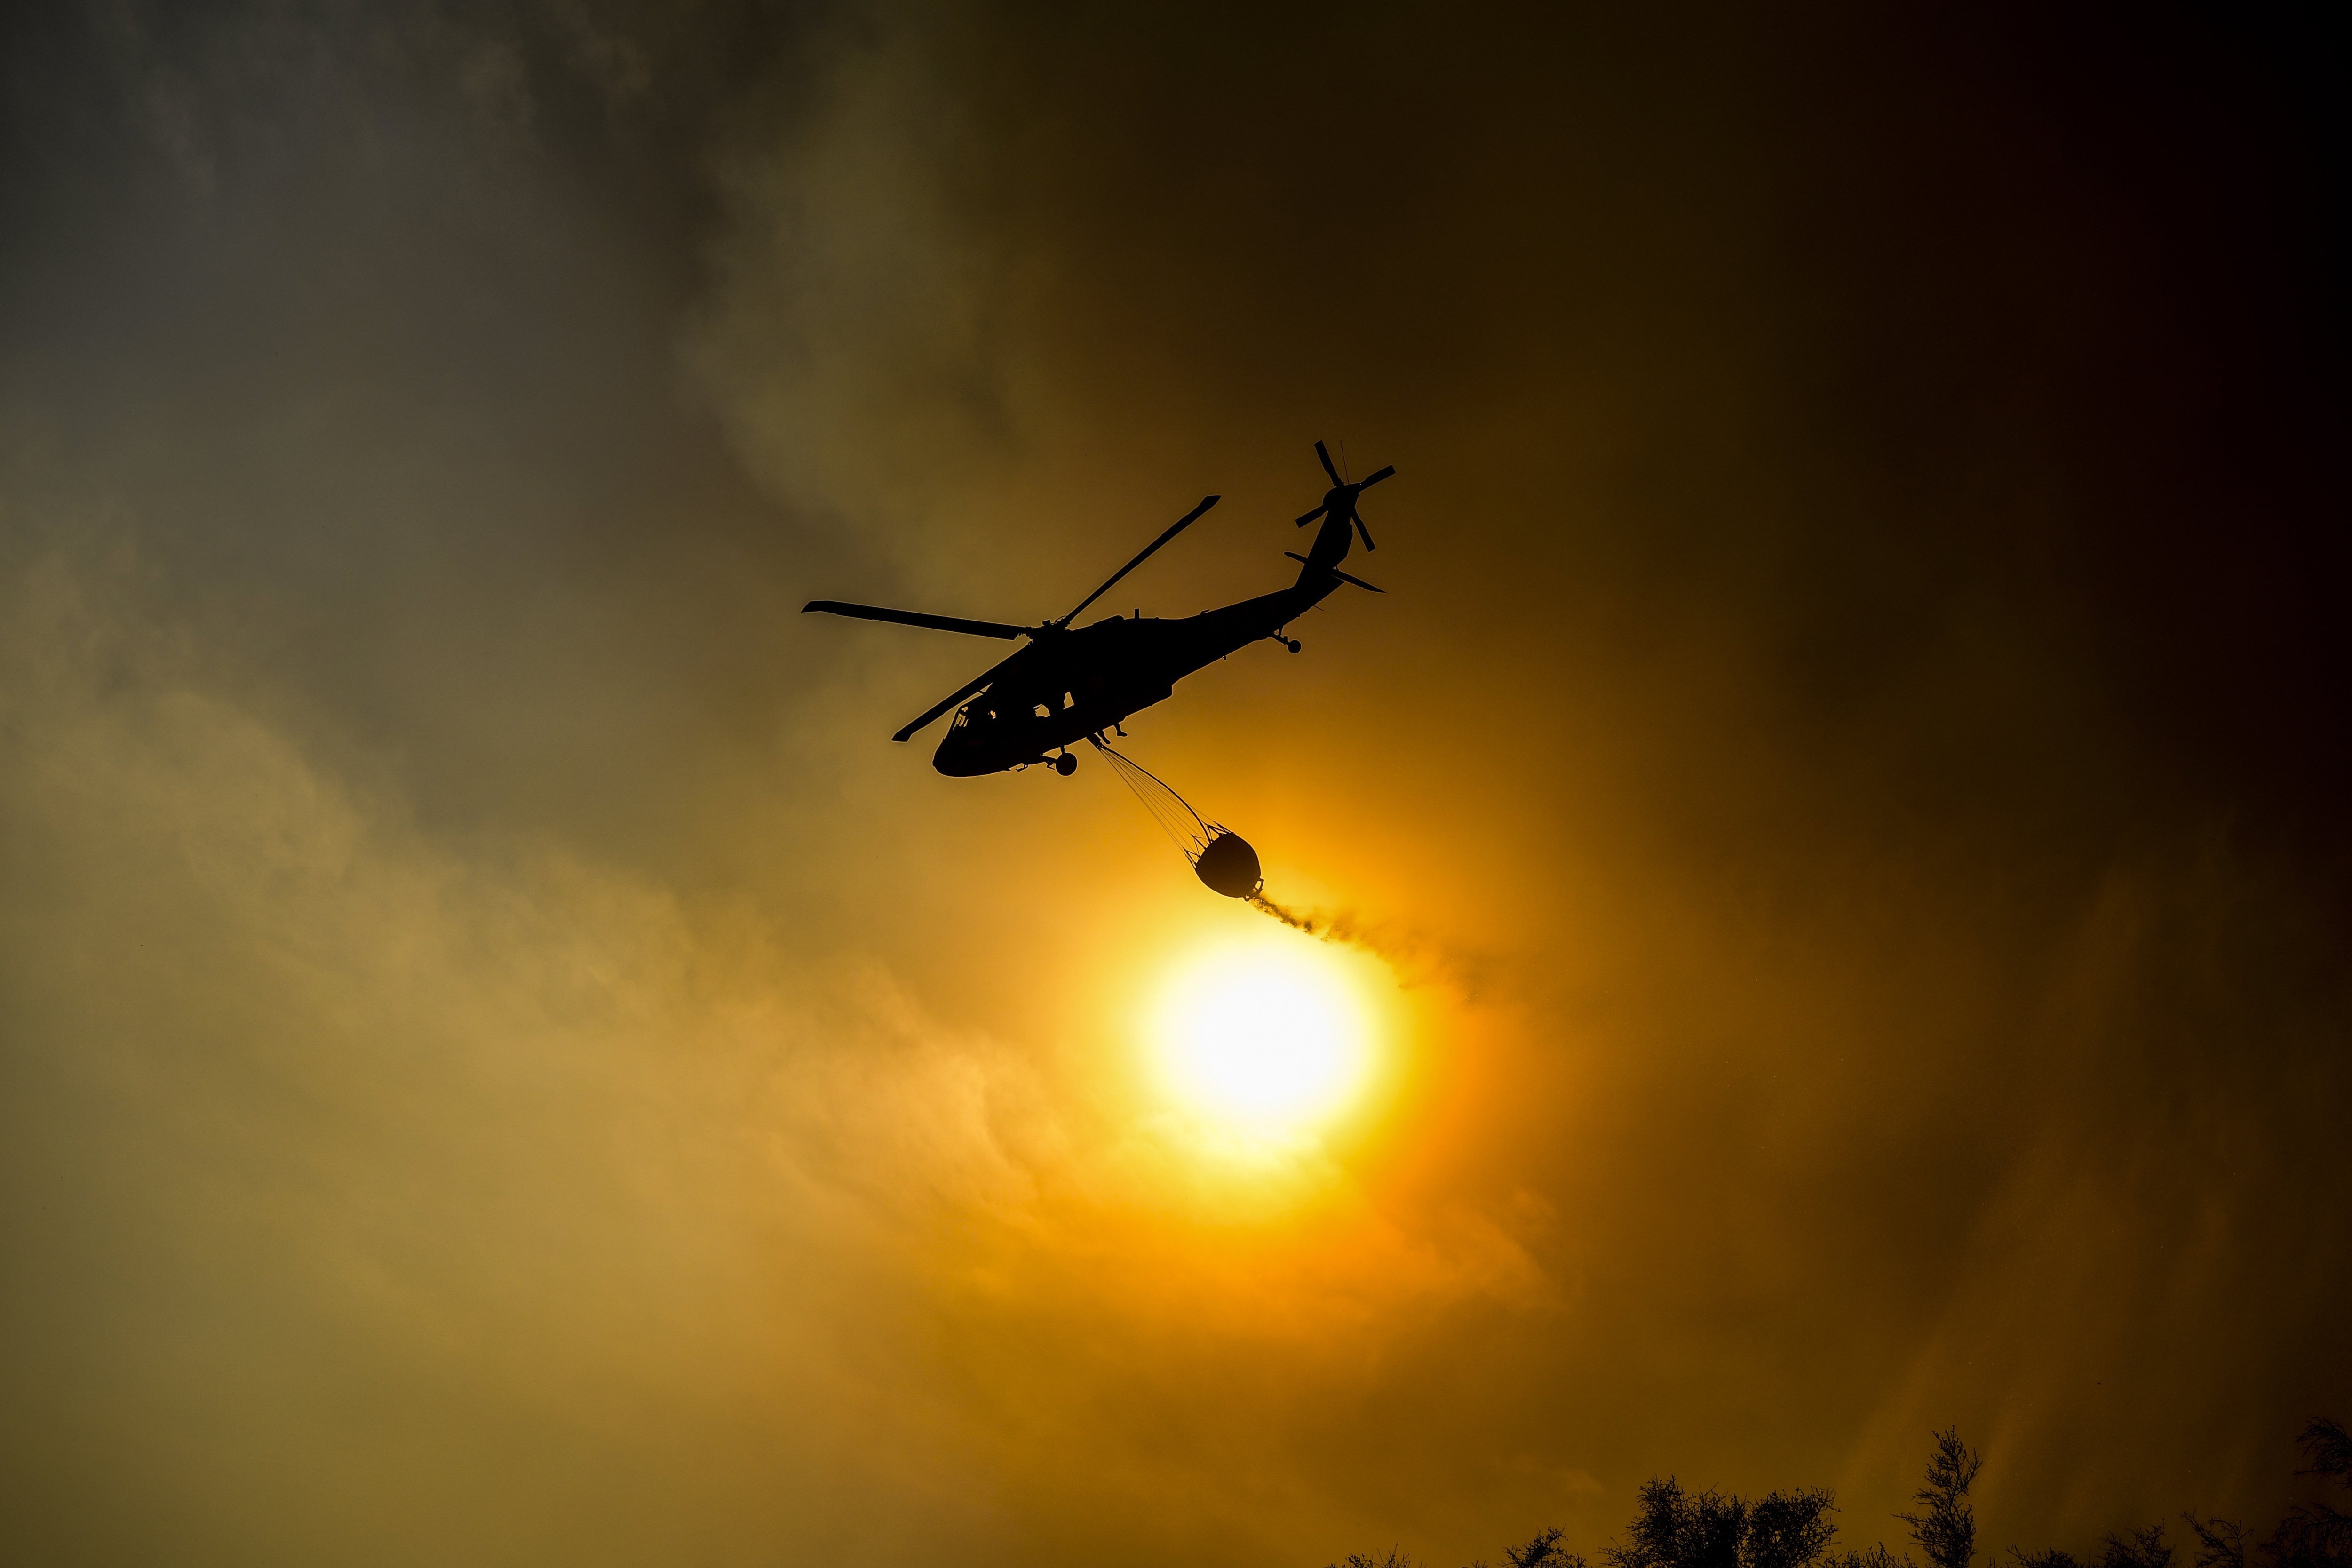 MCX03. Ojai (United States), 09/12/2017.- A firefighting helicopter dropps water on an afflicted area as efforts to battle the Thomas Fire were under way in Ojai, California, USA, 09 December 2017 (issued 23 December 2017). The Thomas Fire, which began 04 December, has now become the largest wildfire in California history at 273,400 acres (110,641 hectares) and caused, on 14 December, the death of a firefighter. Officials estimate they will not contain the fire until 07 January 2018. (Incendio, Estados Unidos) EFE/EPA/JOHN CETRINO